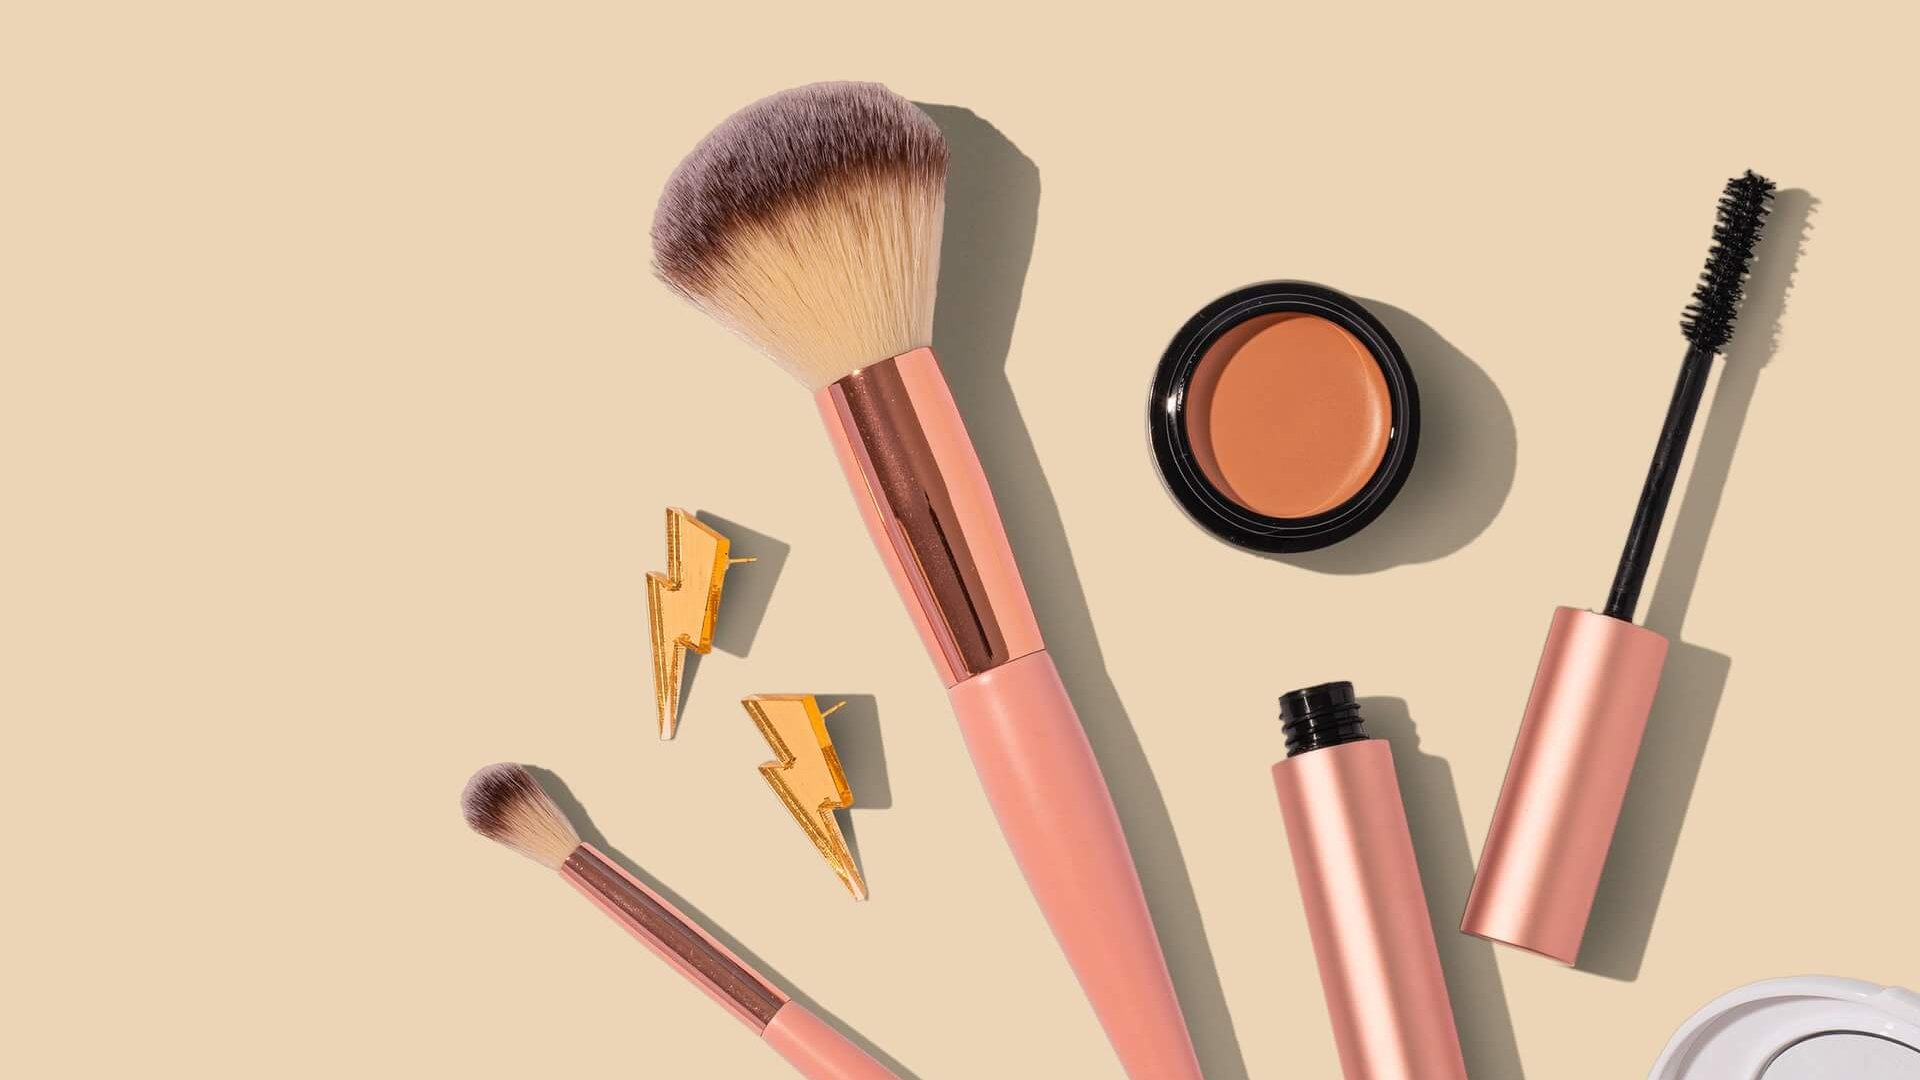 Miss A Is The Online Beauty Shop Where Almost Everything is $1